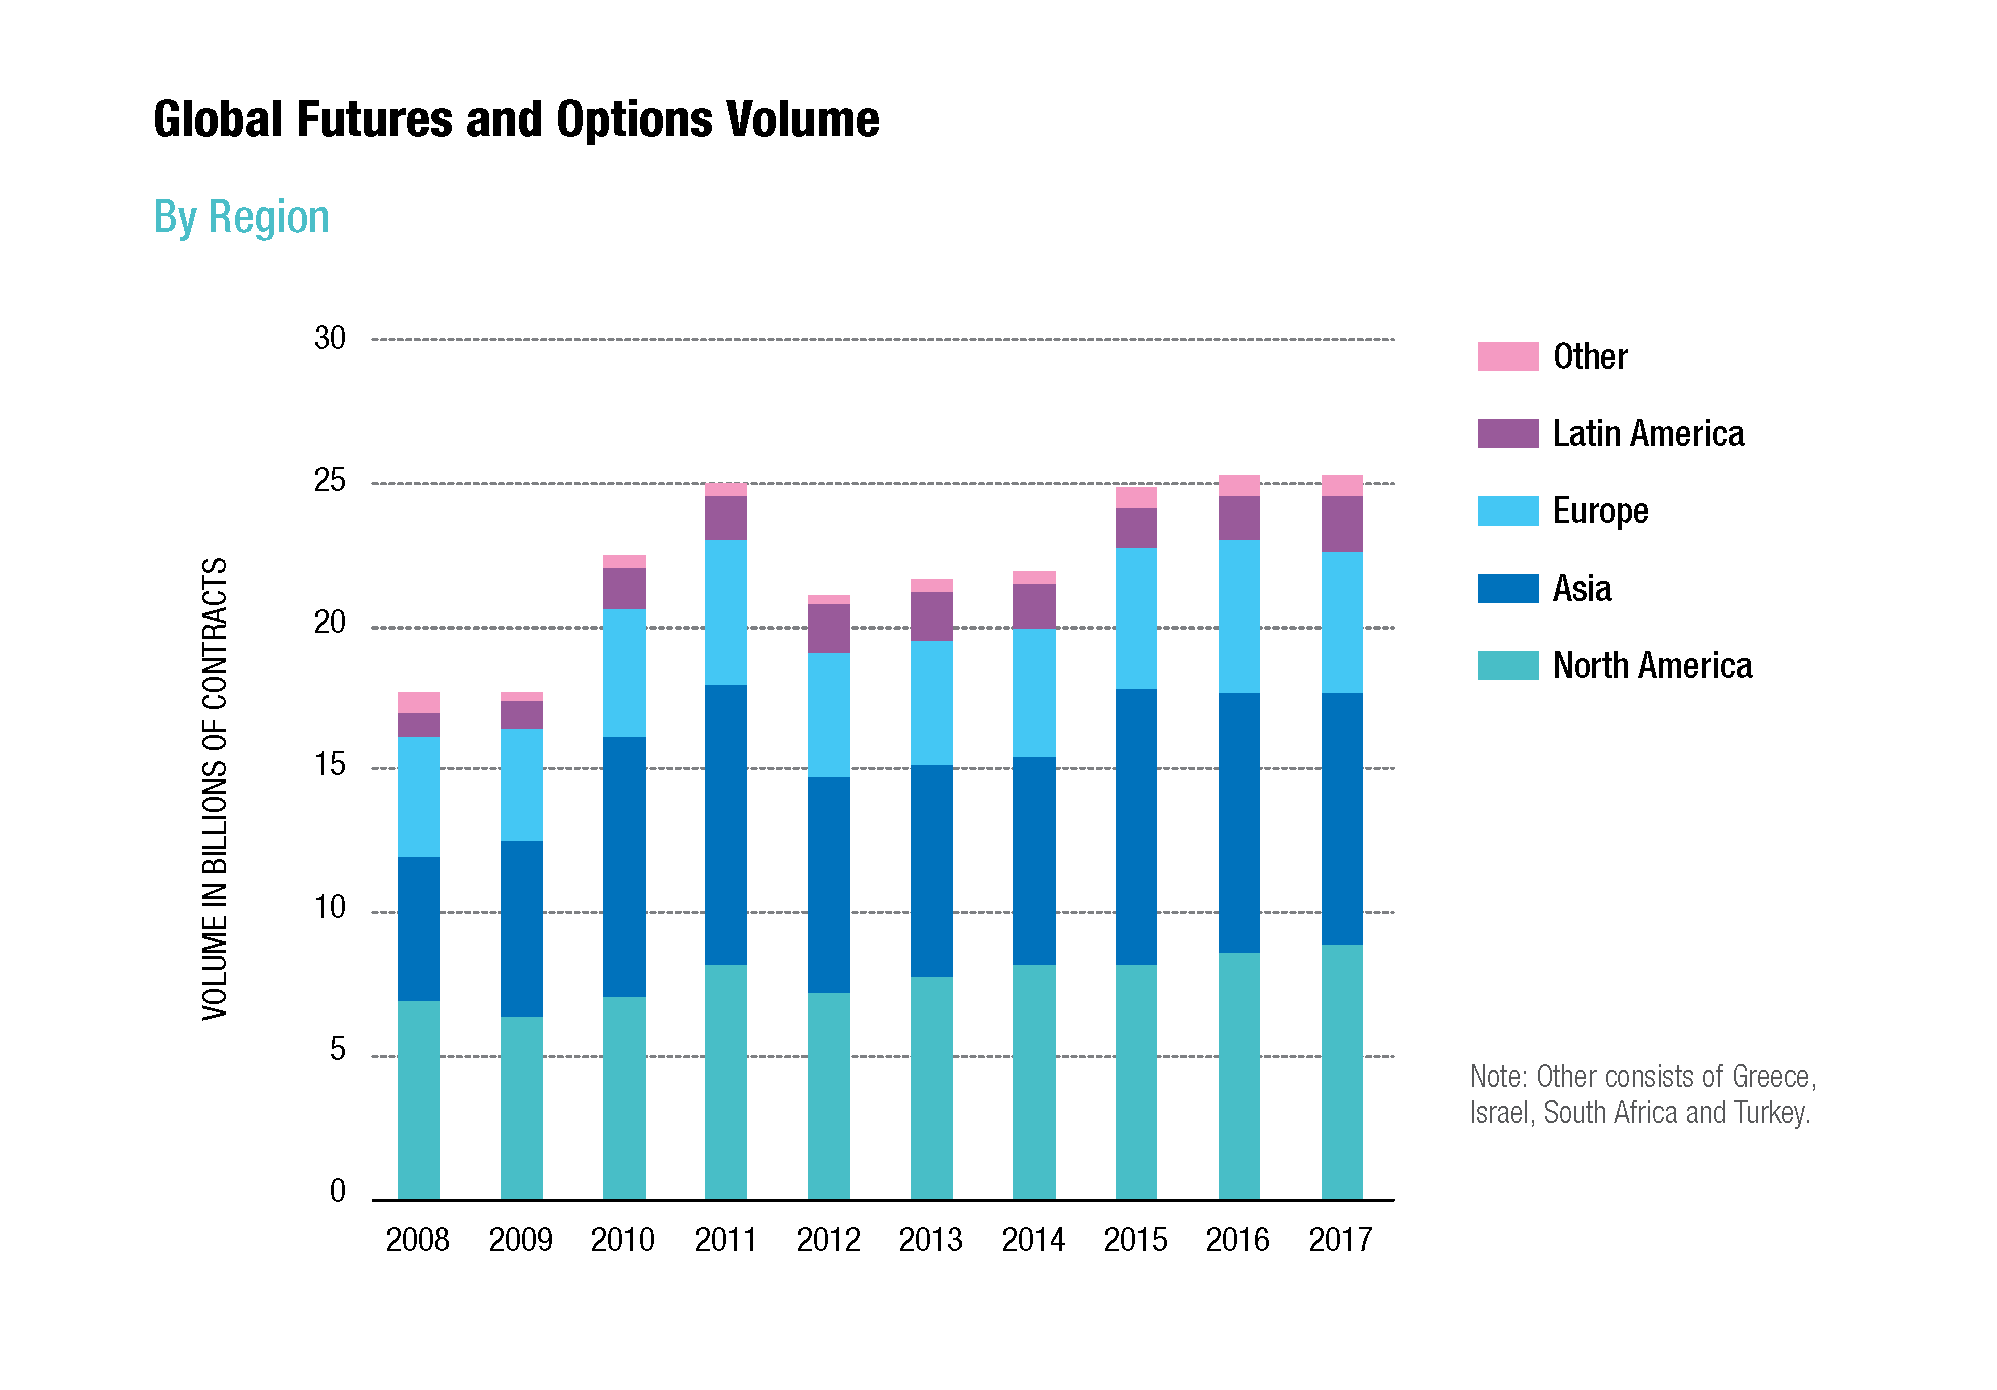 Global Futures and Options Volume by Region